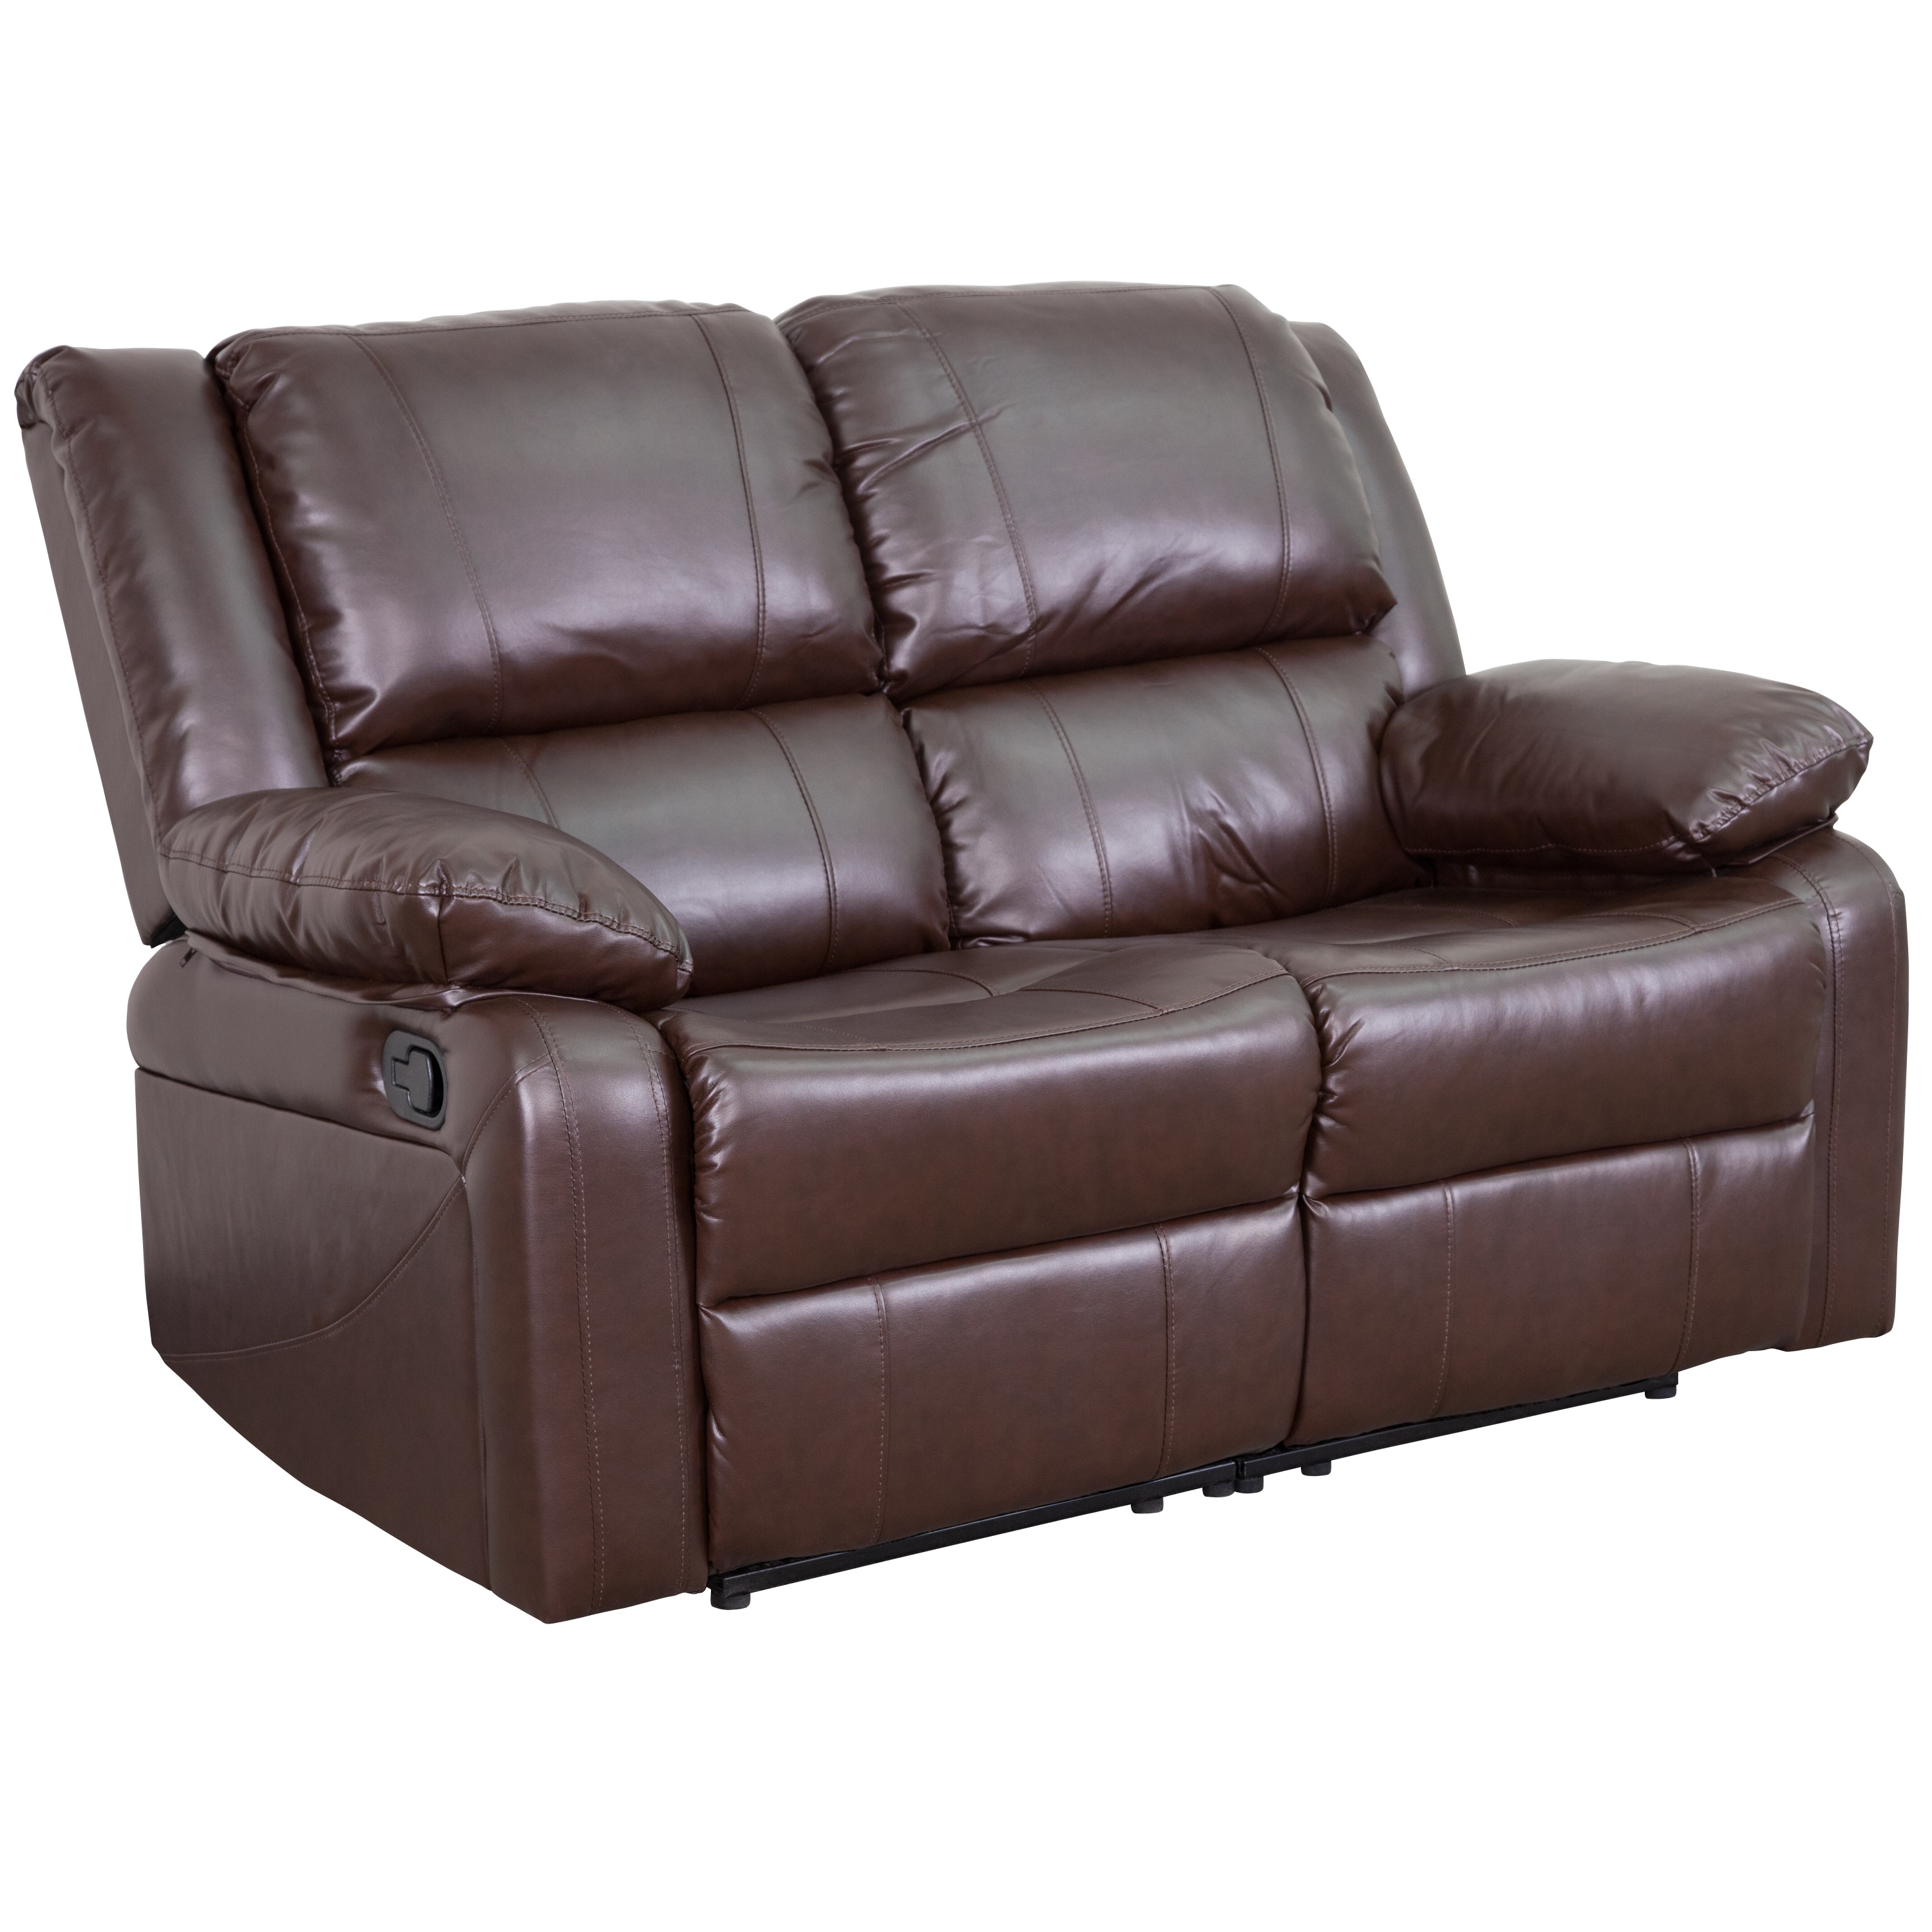 Faux Leather Reclining Loveseat, Brown Leather Love Seat